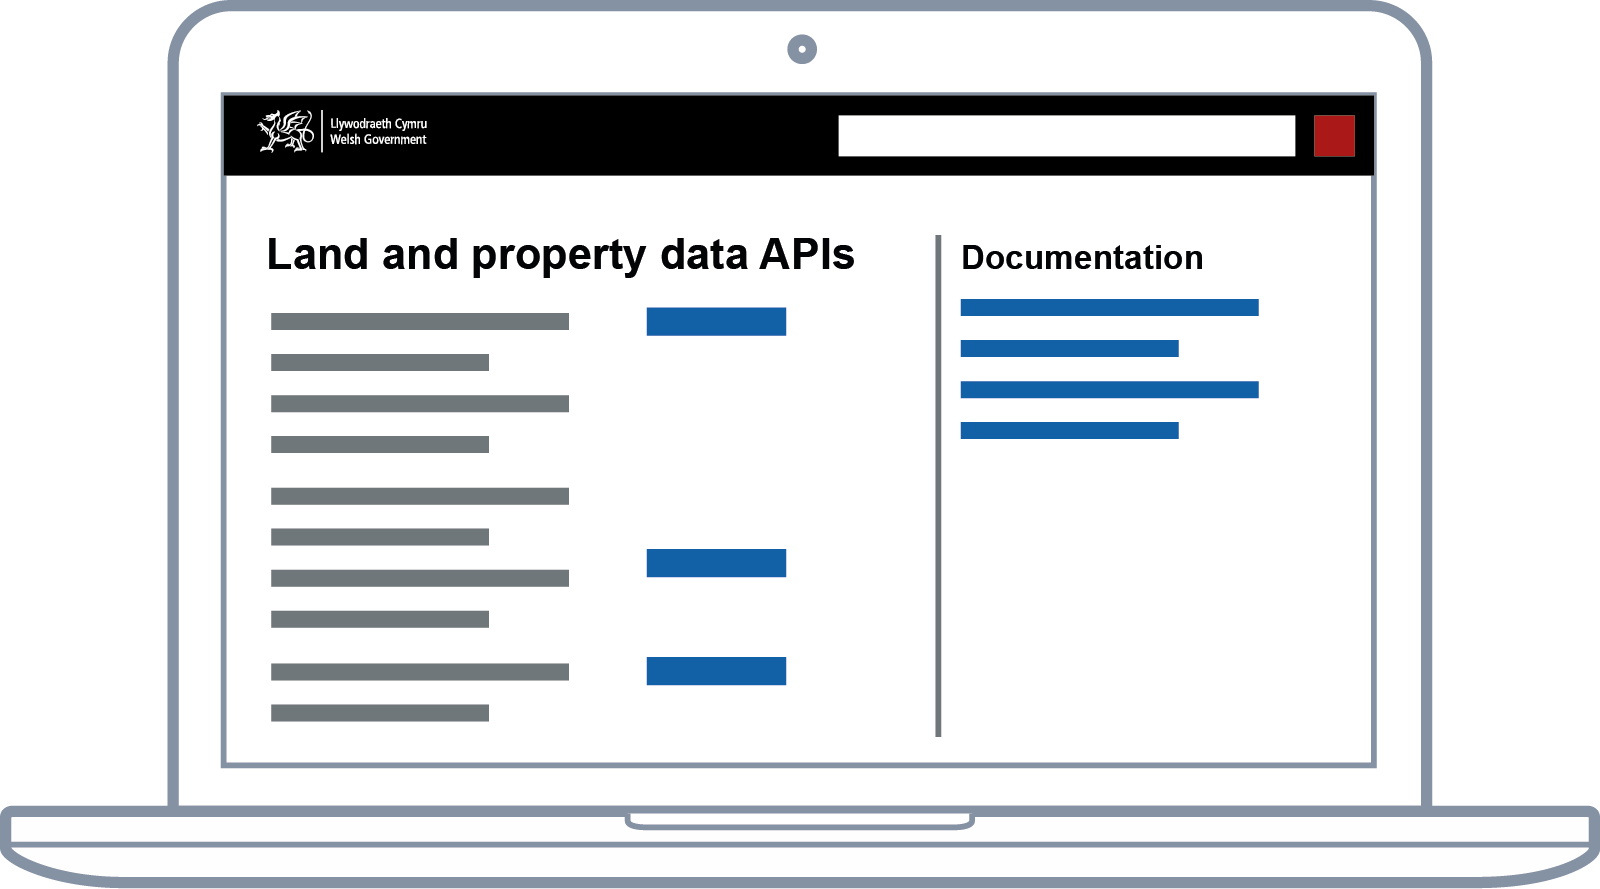 A government branded property and land data API service